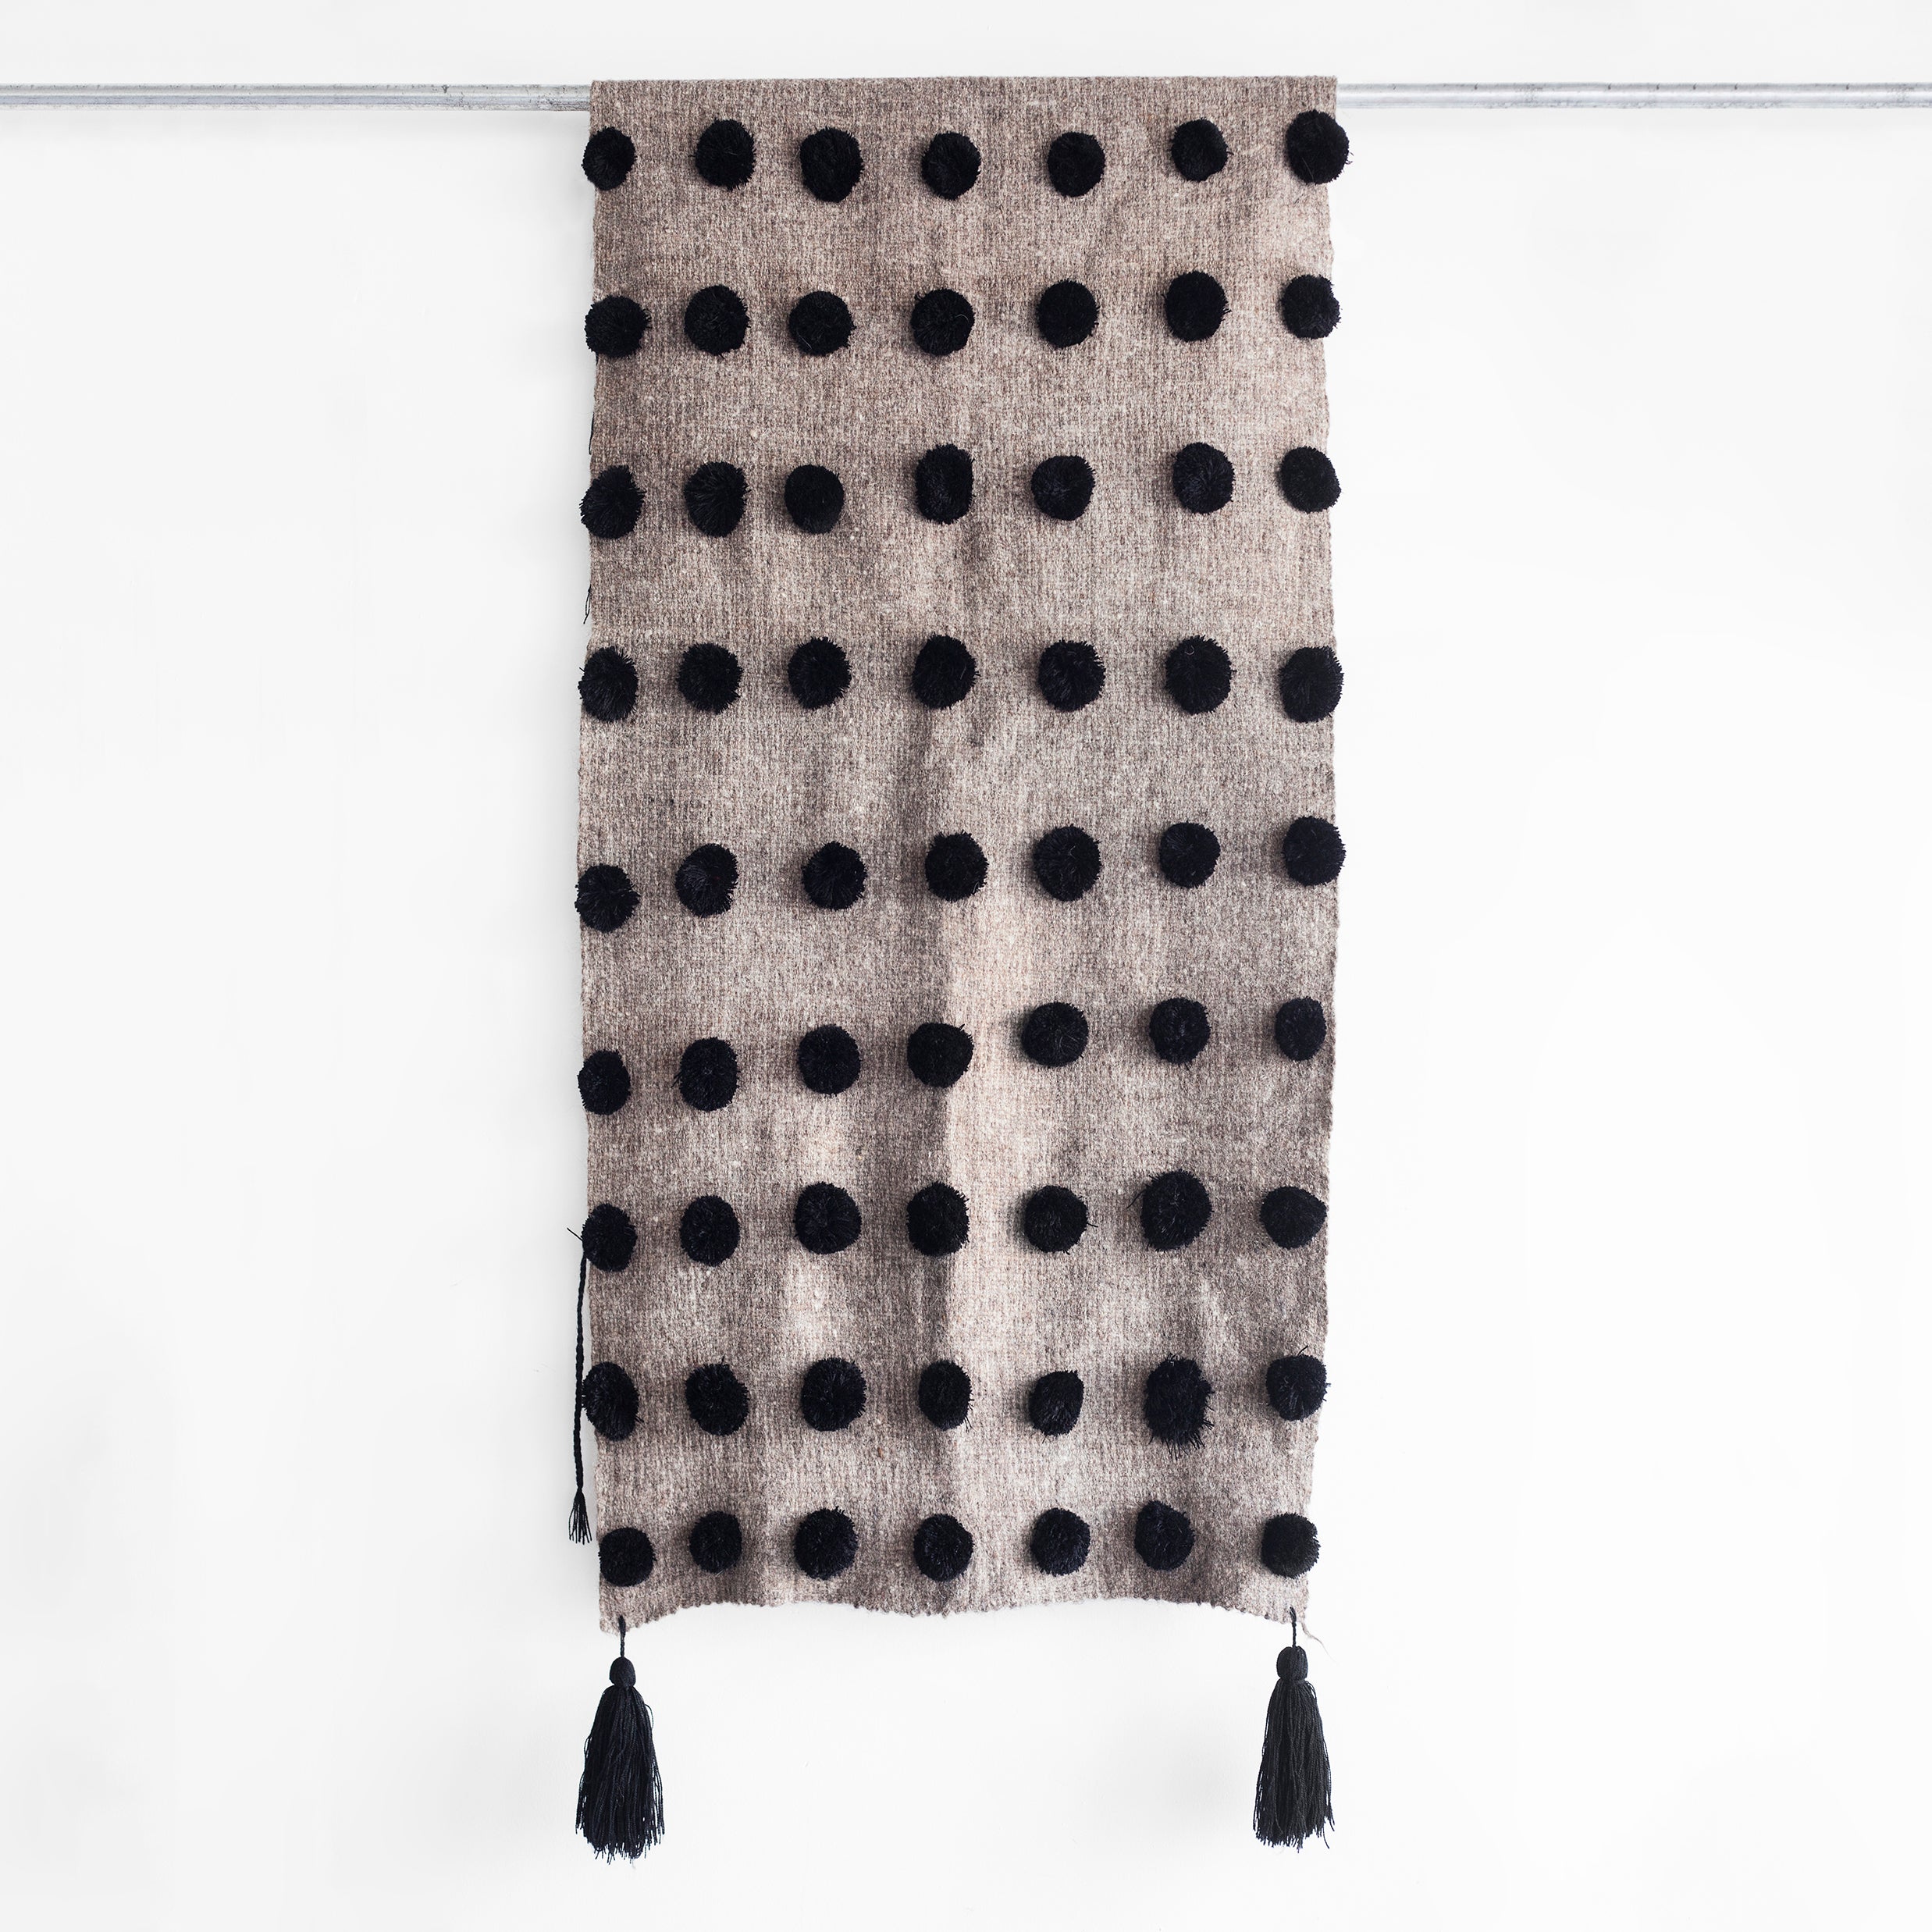 Grey wool throw covered in rows of black pom poms with black tassels at each corner